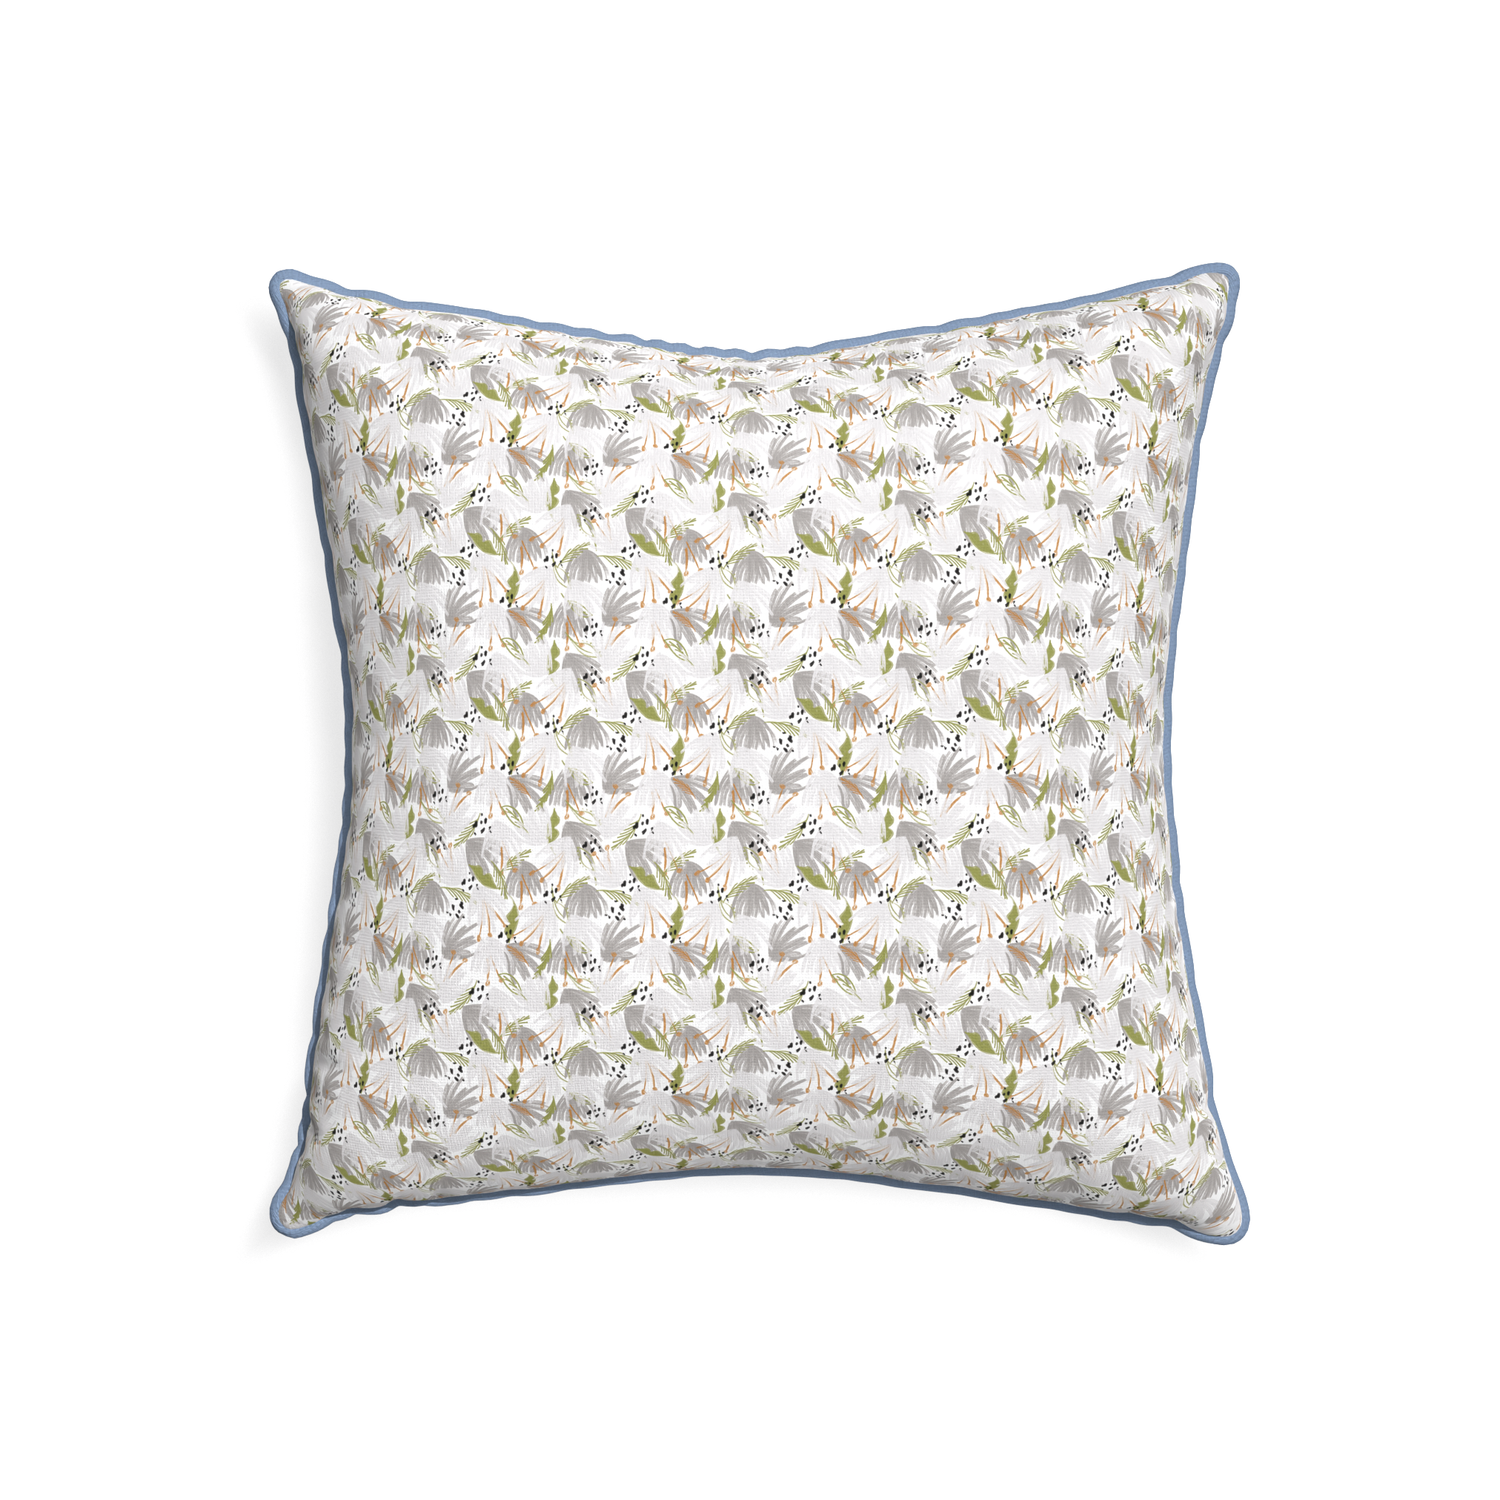 22-square eden grey custom grey floralpillow with sky piping on white background